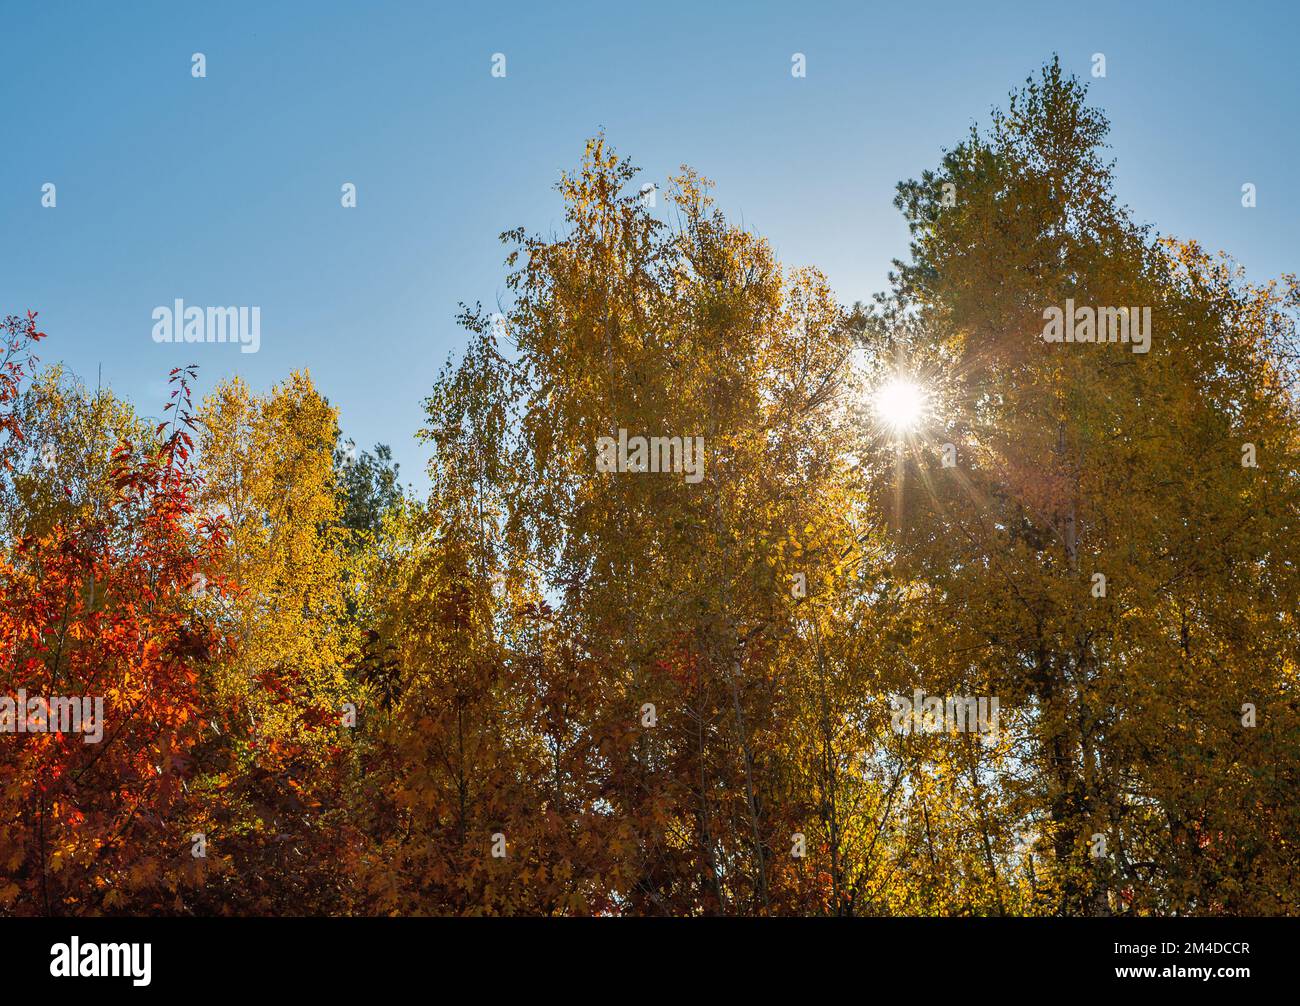 Landscape autumn forest trees against sun and clear blue sky Stock Photo